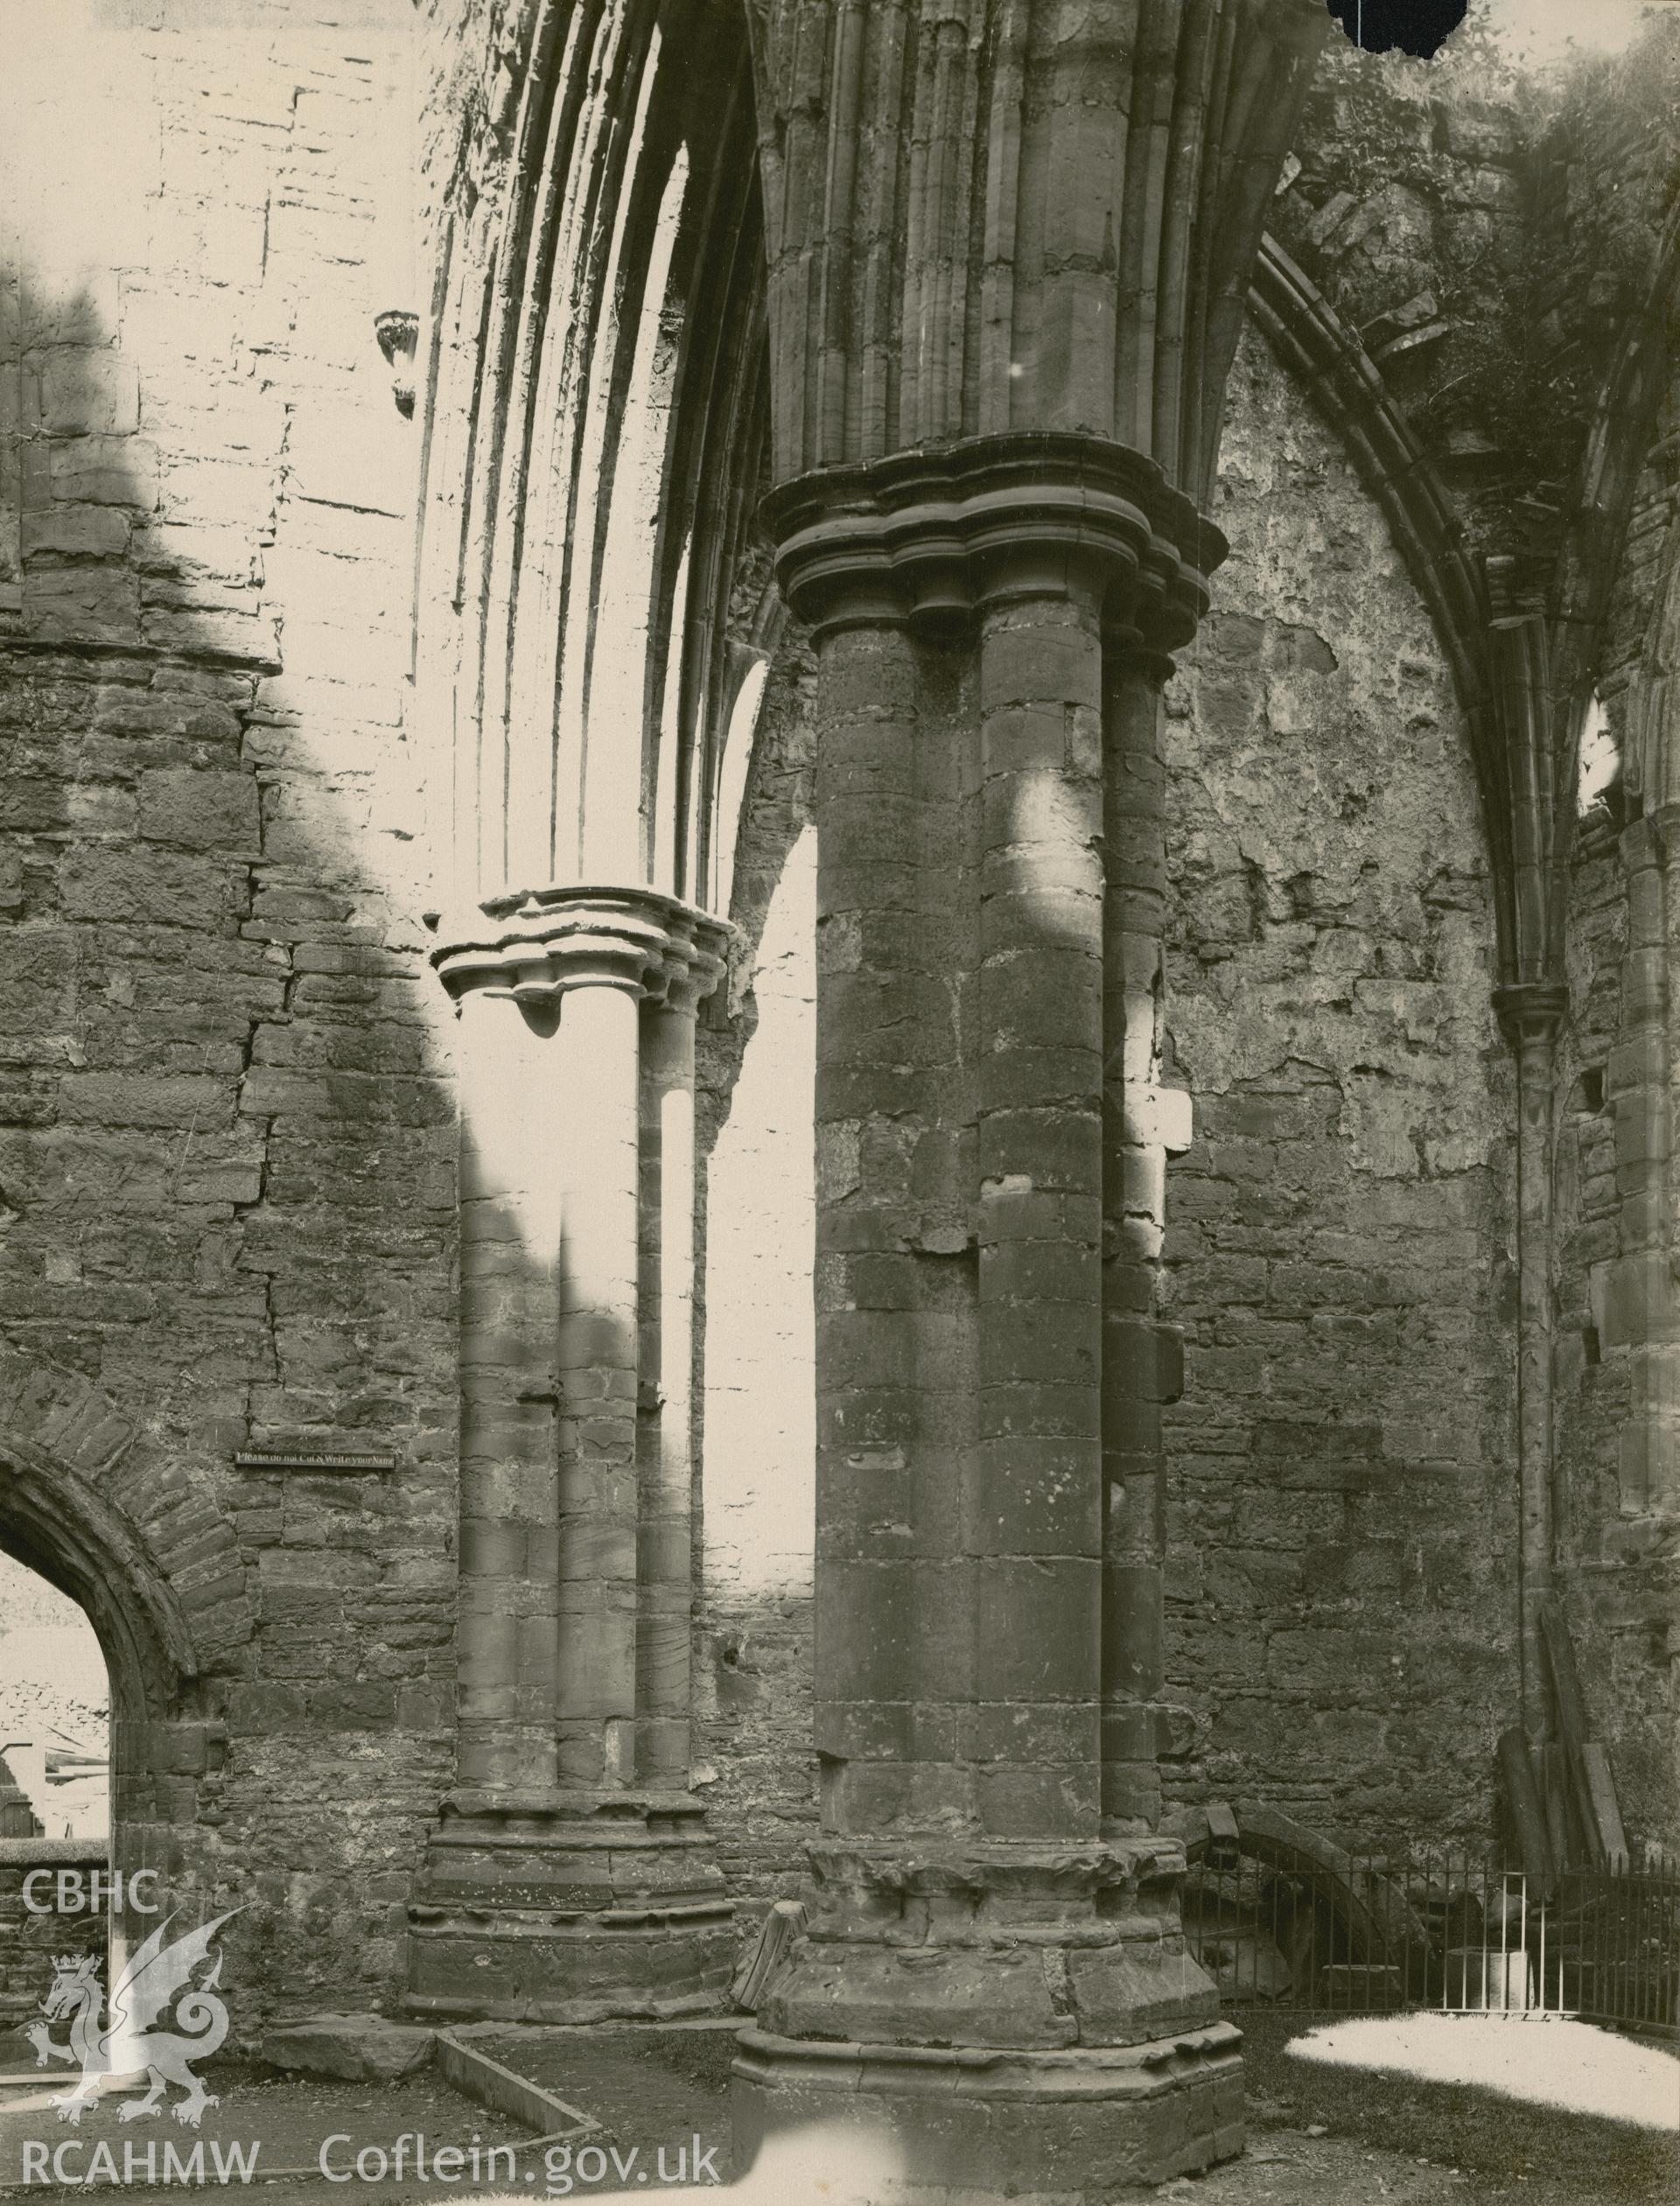 Digital copy of an early National Buildings Record photograph showing northeast chapel of the north transept at Tintern Abbey.